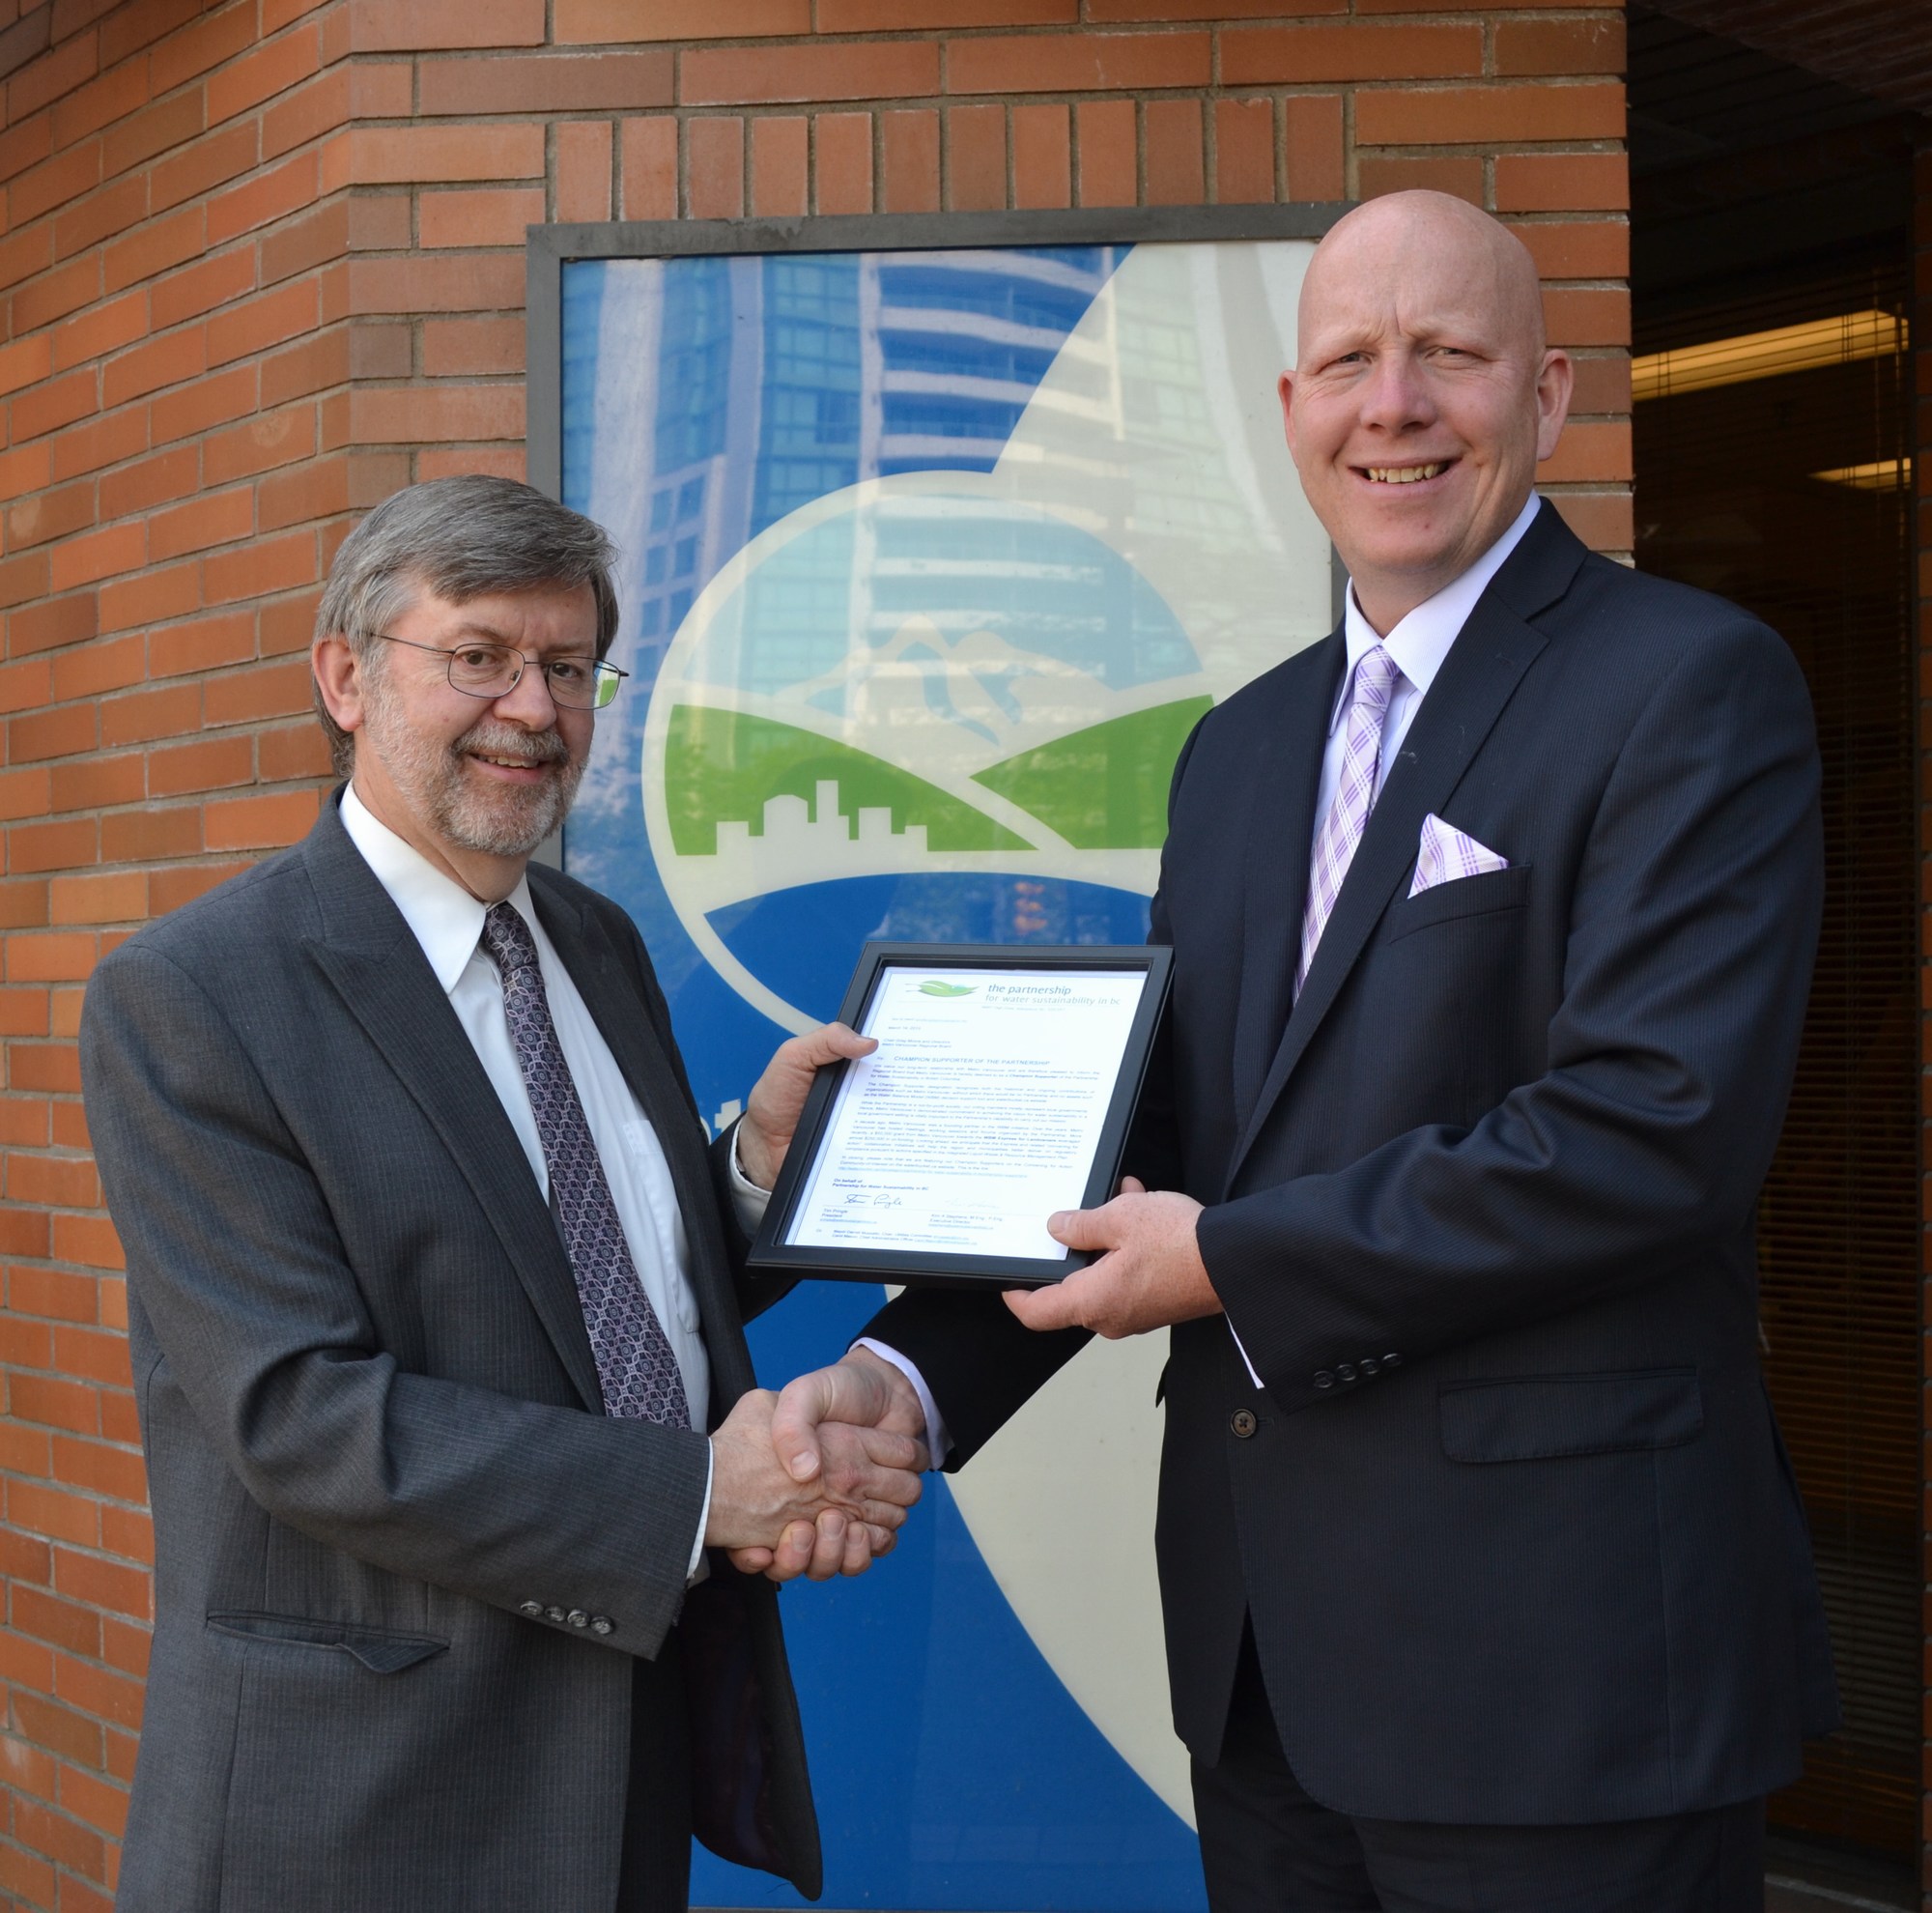 Kim Stephens (L) presents the "letter of recognition" Metro Vancouver Chair Greg Moore (R) in May 2014